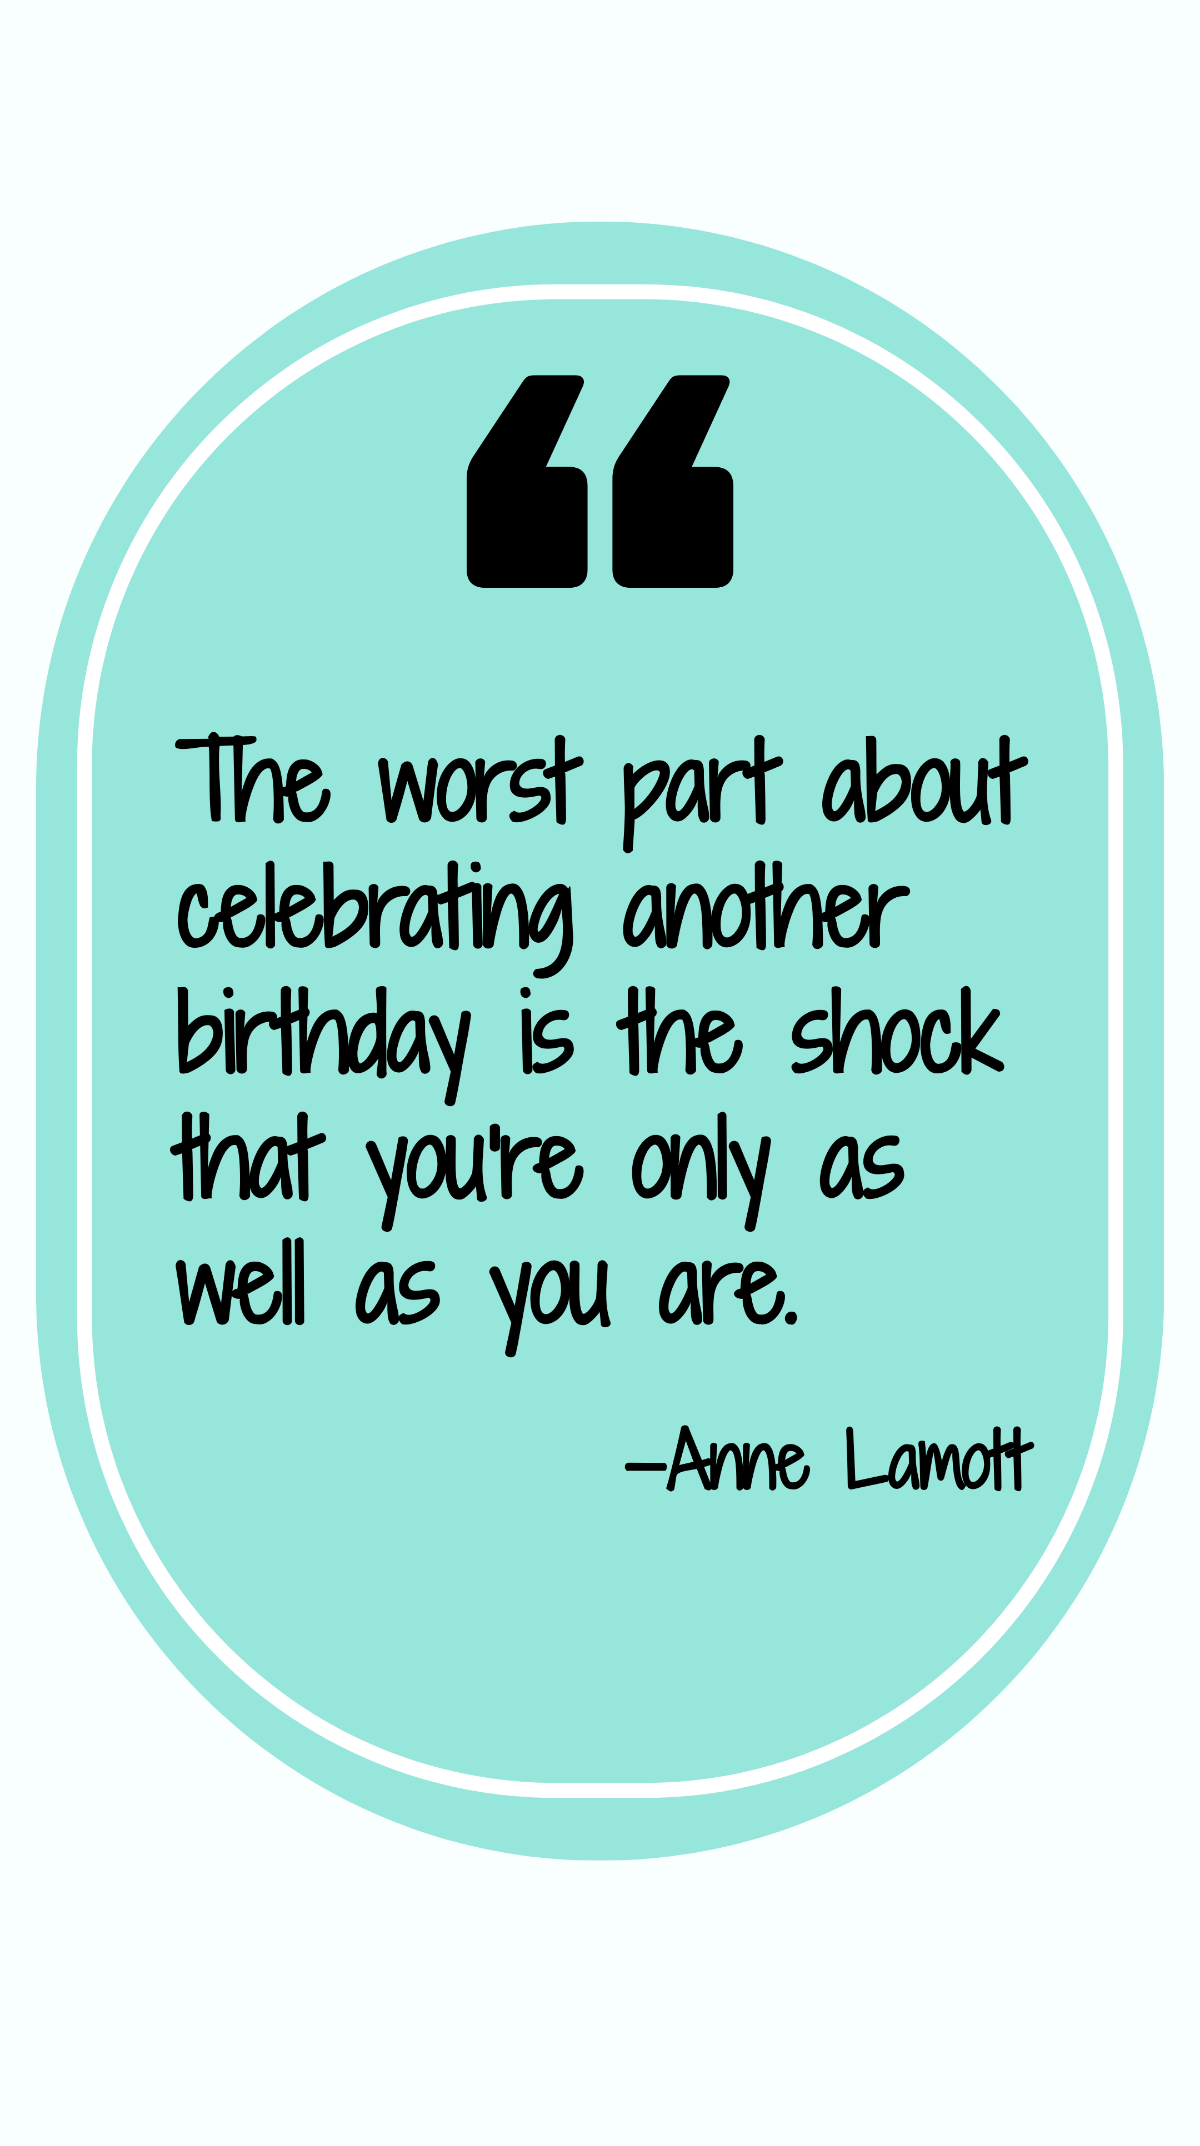 Anne Lamott - The worst part about celebrating another birthday is the shock that you're only as well as you are.